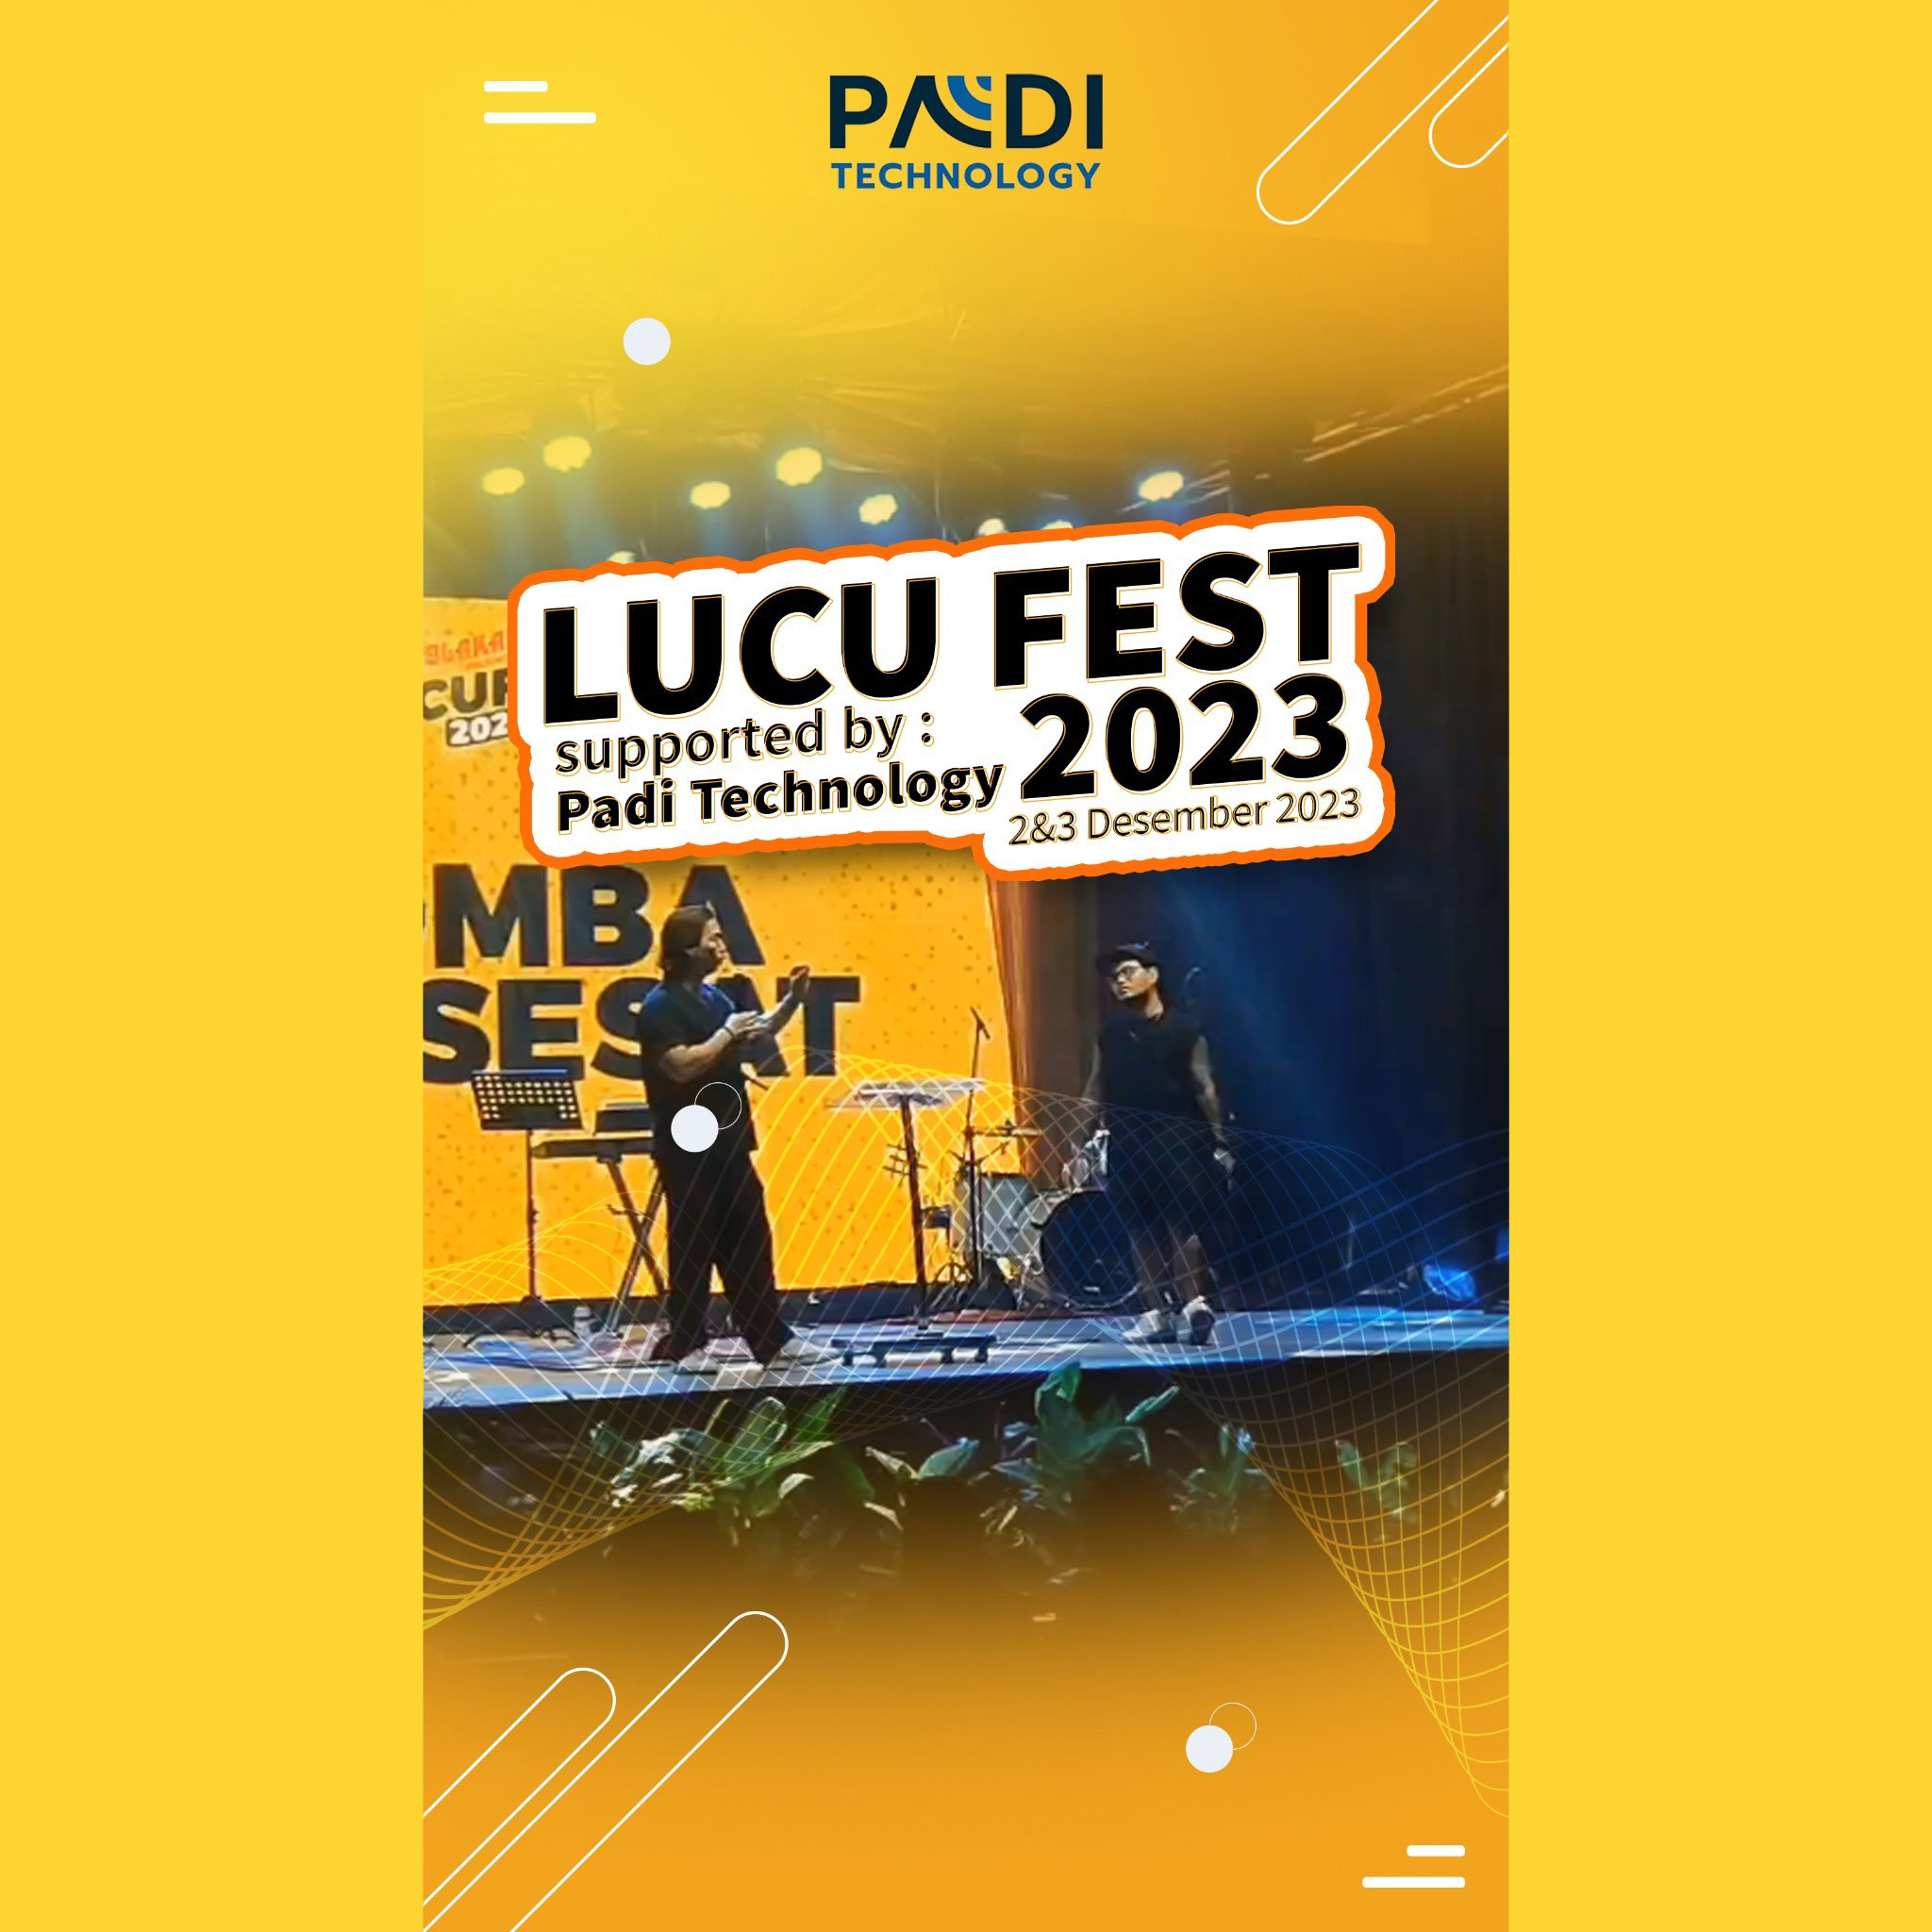 Padi Internet by Padi Technology, Supporting Event “LUCUFEST 2023” di MBloc Space Jakarta, 2-3 Desember 2023